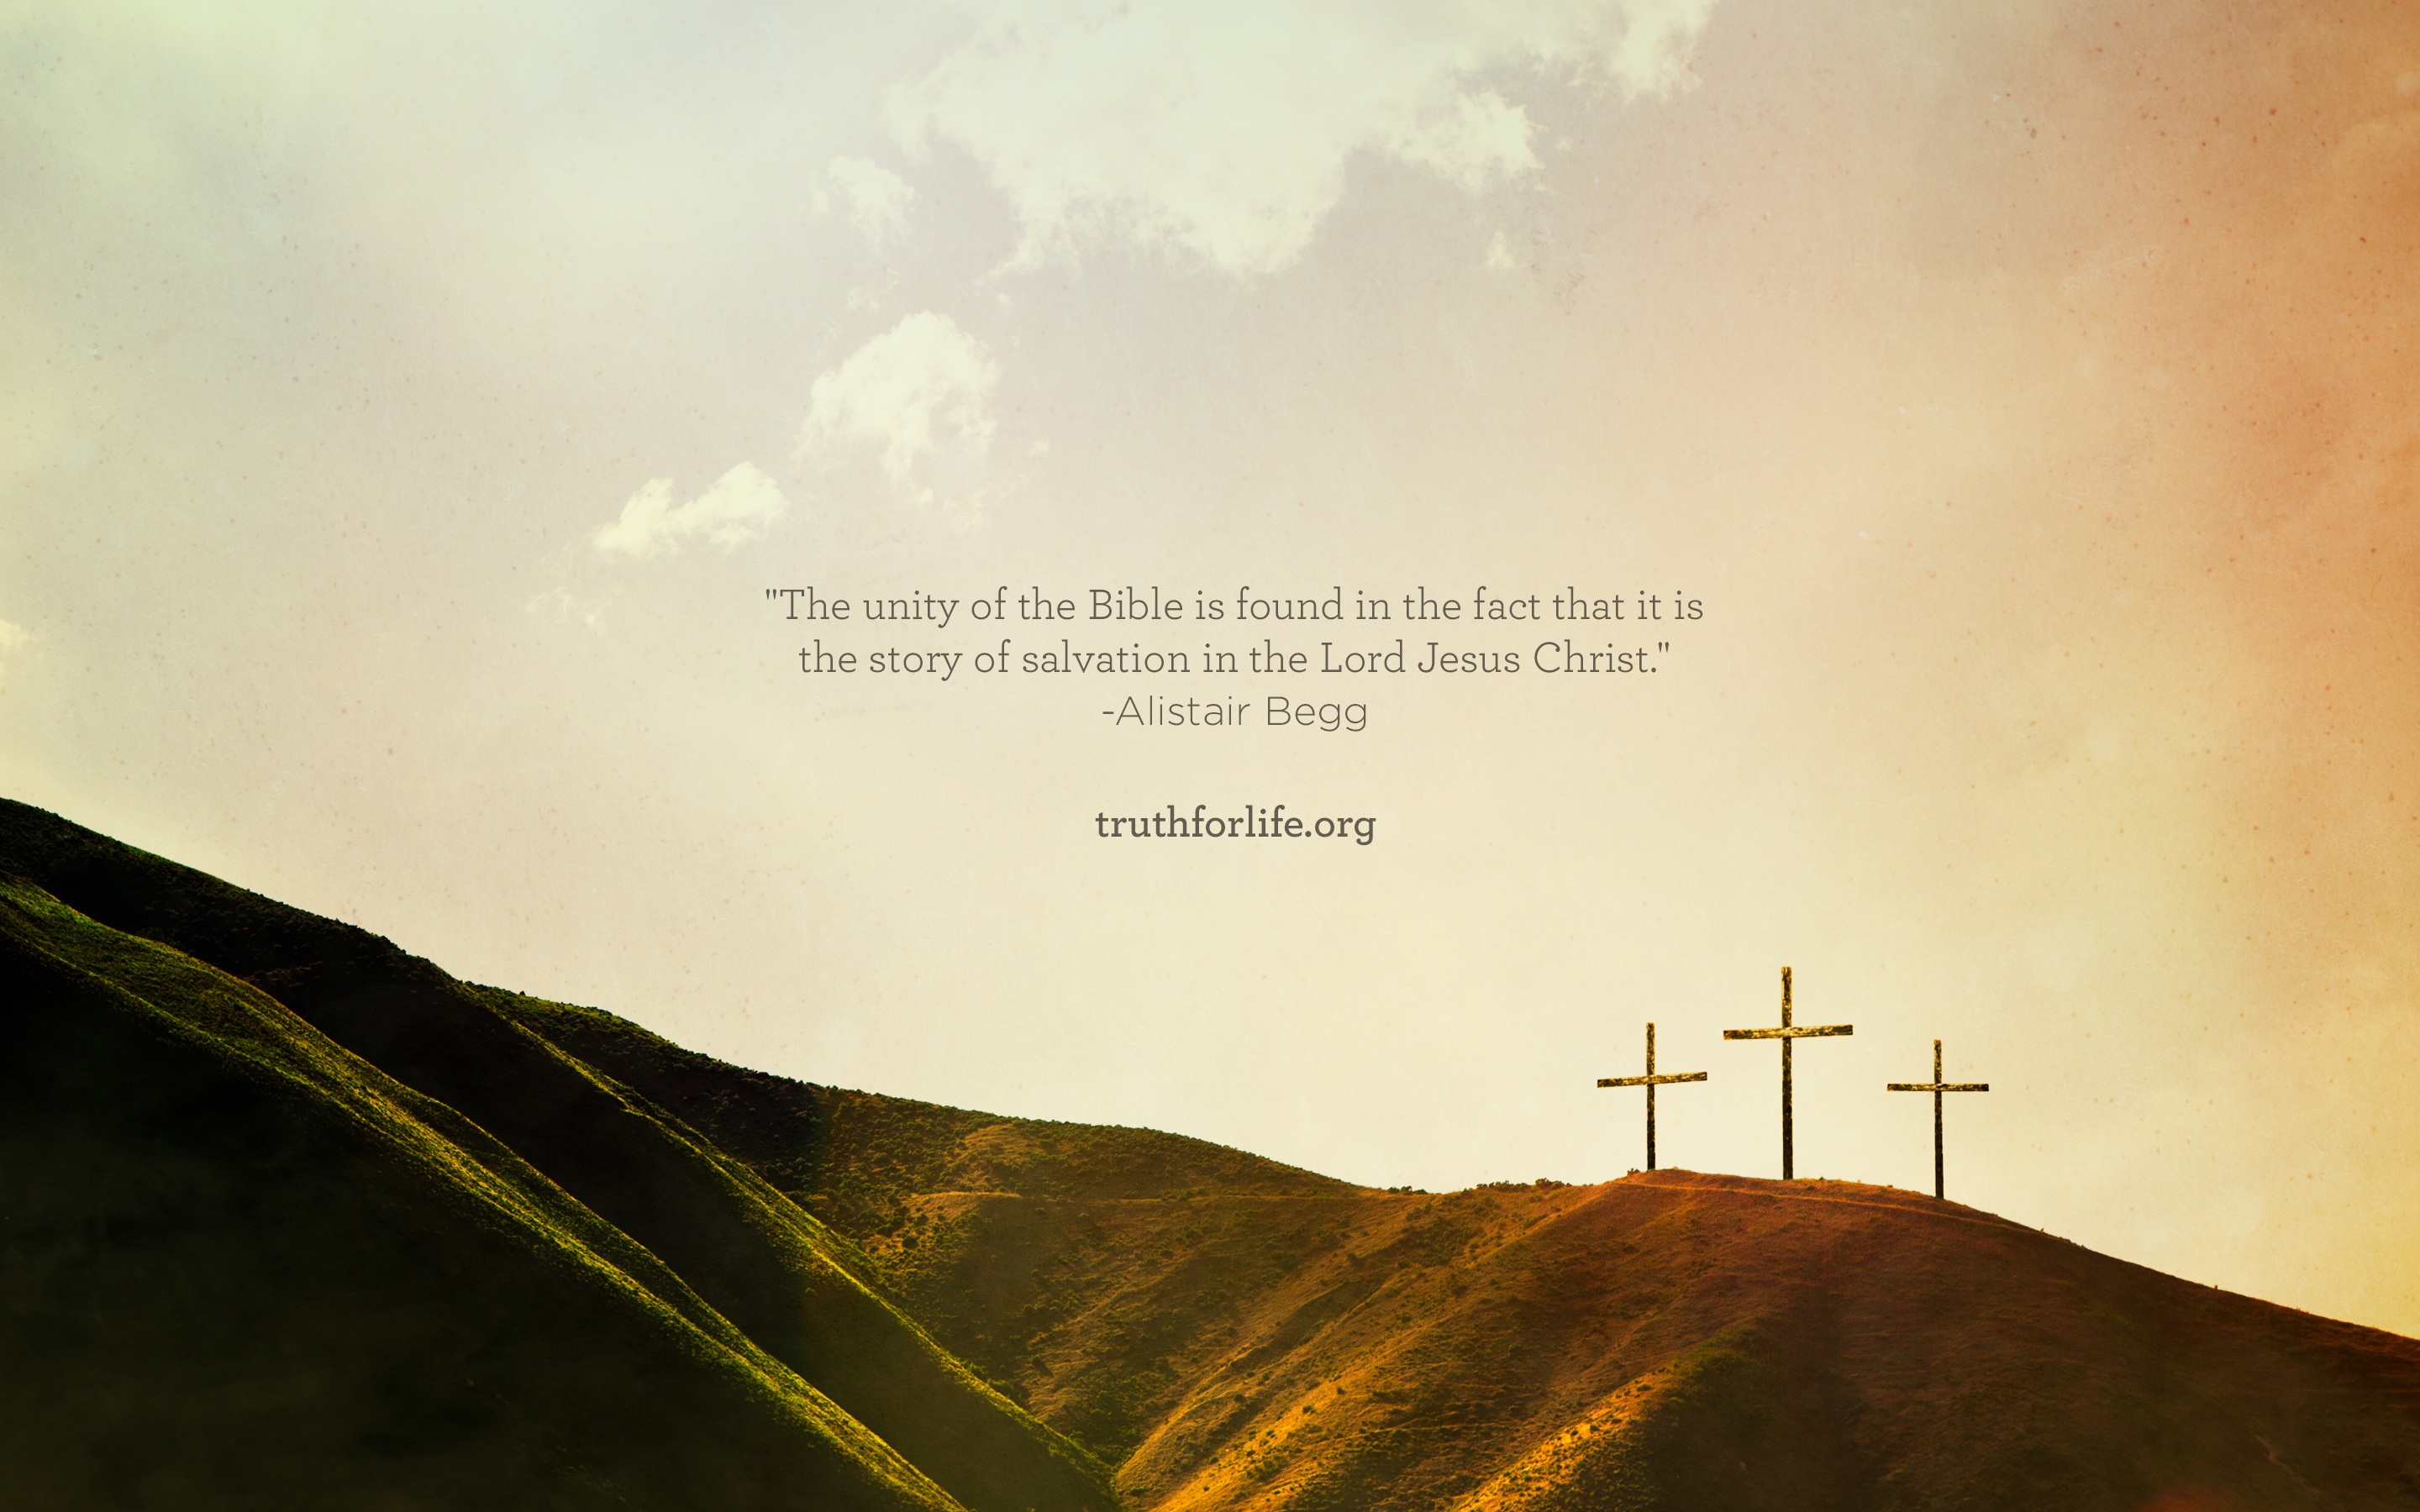 jesus christ wallpaper with bible verse in english